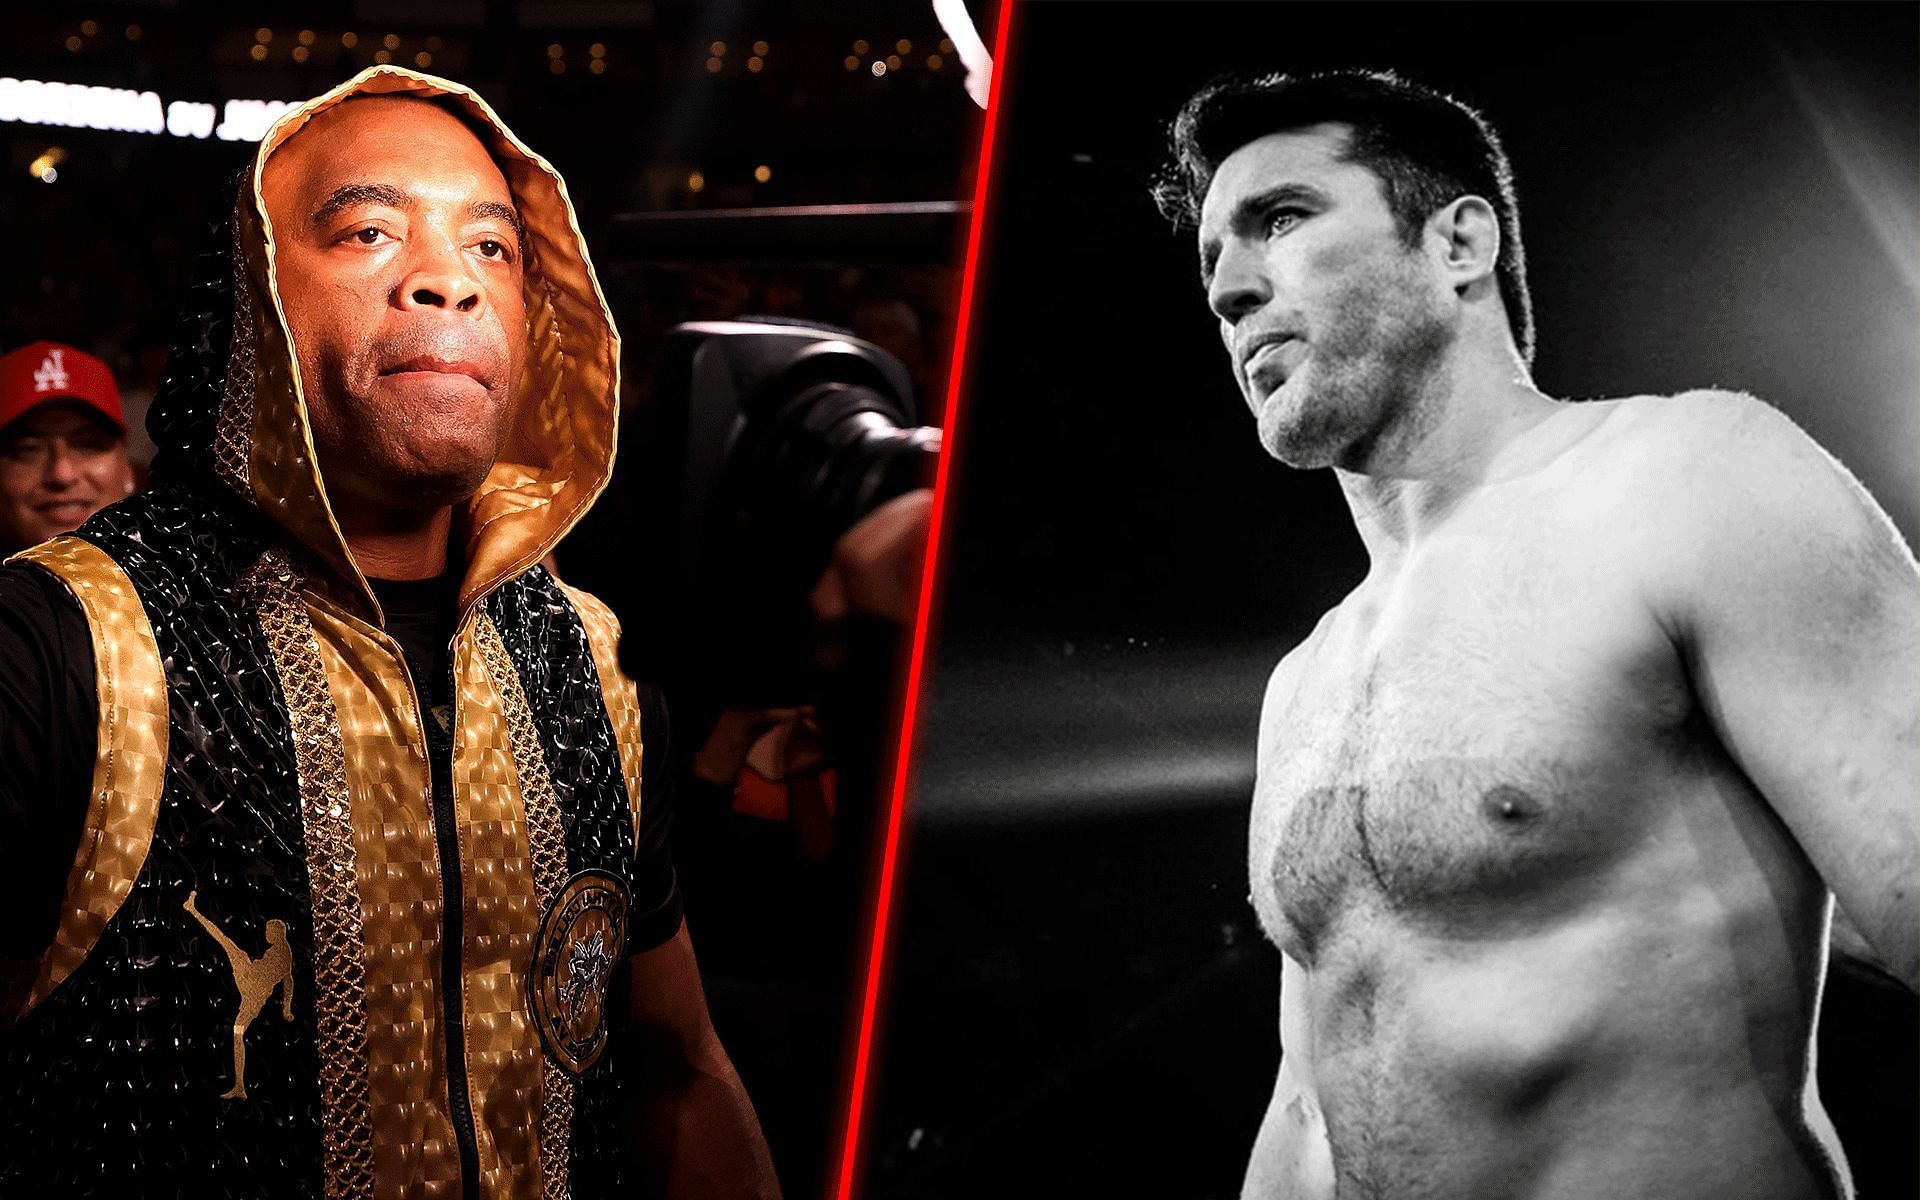 Anderson Silva (left) vs. Chael Sonnen (right) 3 will take place in boxing [Images courtesy @sonnench on Instagram]